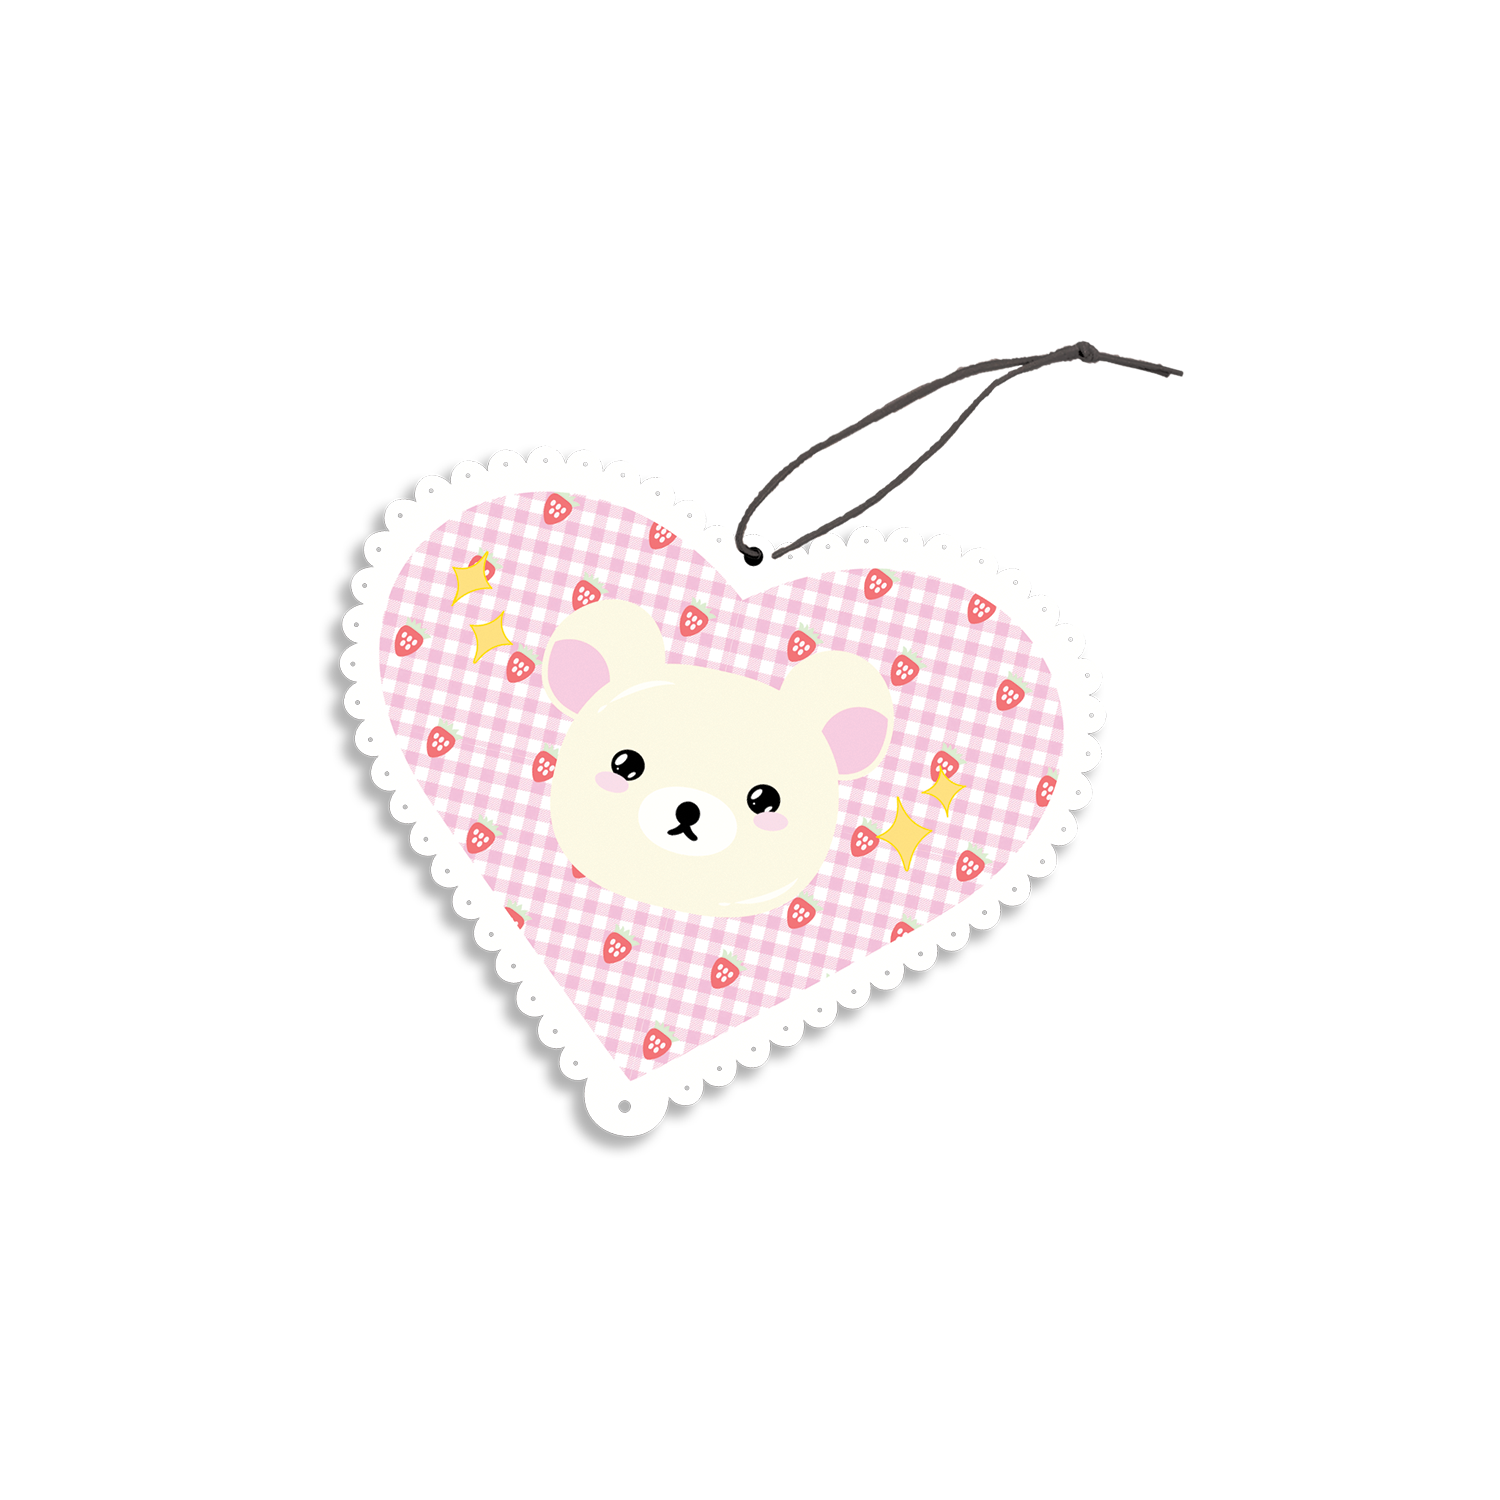 White Bear Air Freshener design is a white bear inside a pink lace-scalloped heart with yellow sparkles.